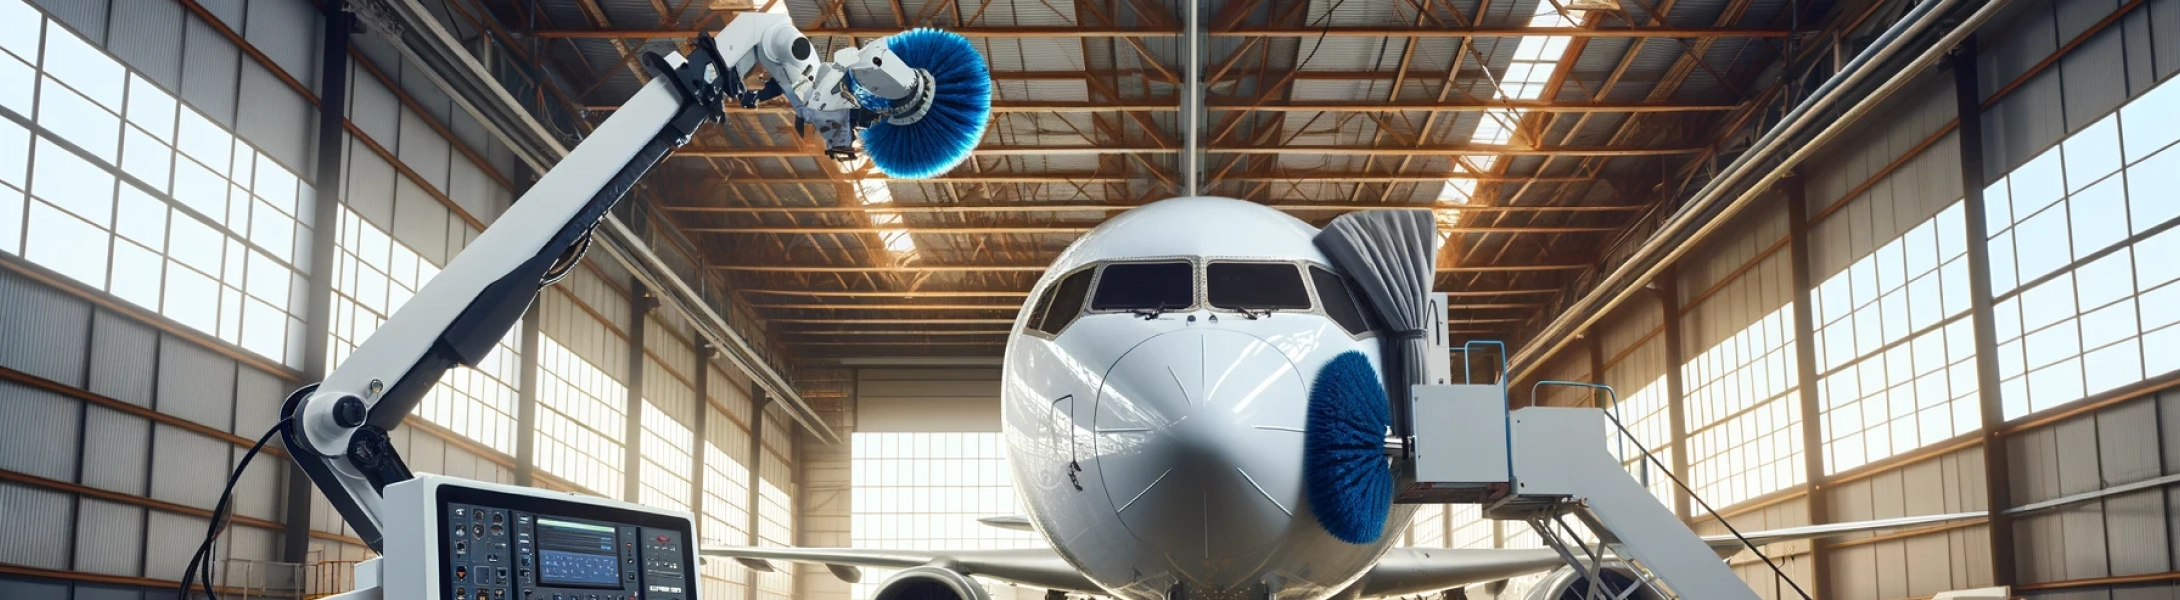 Custom Airline Cleaning Scheduling Software - Revolutionizing Airport Efficiency